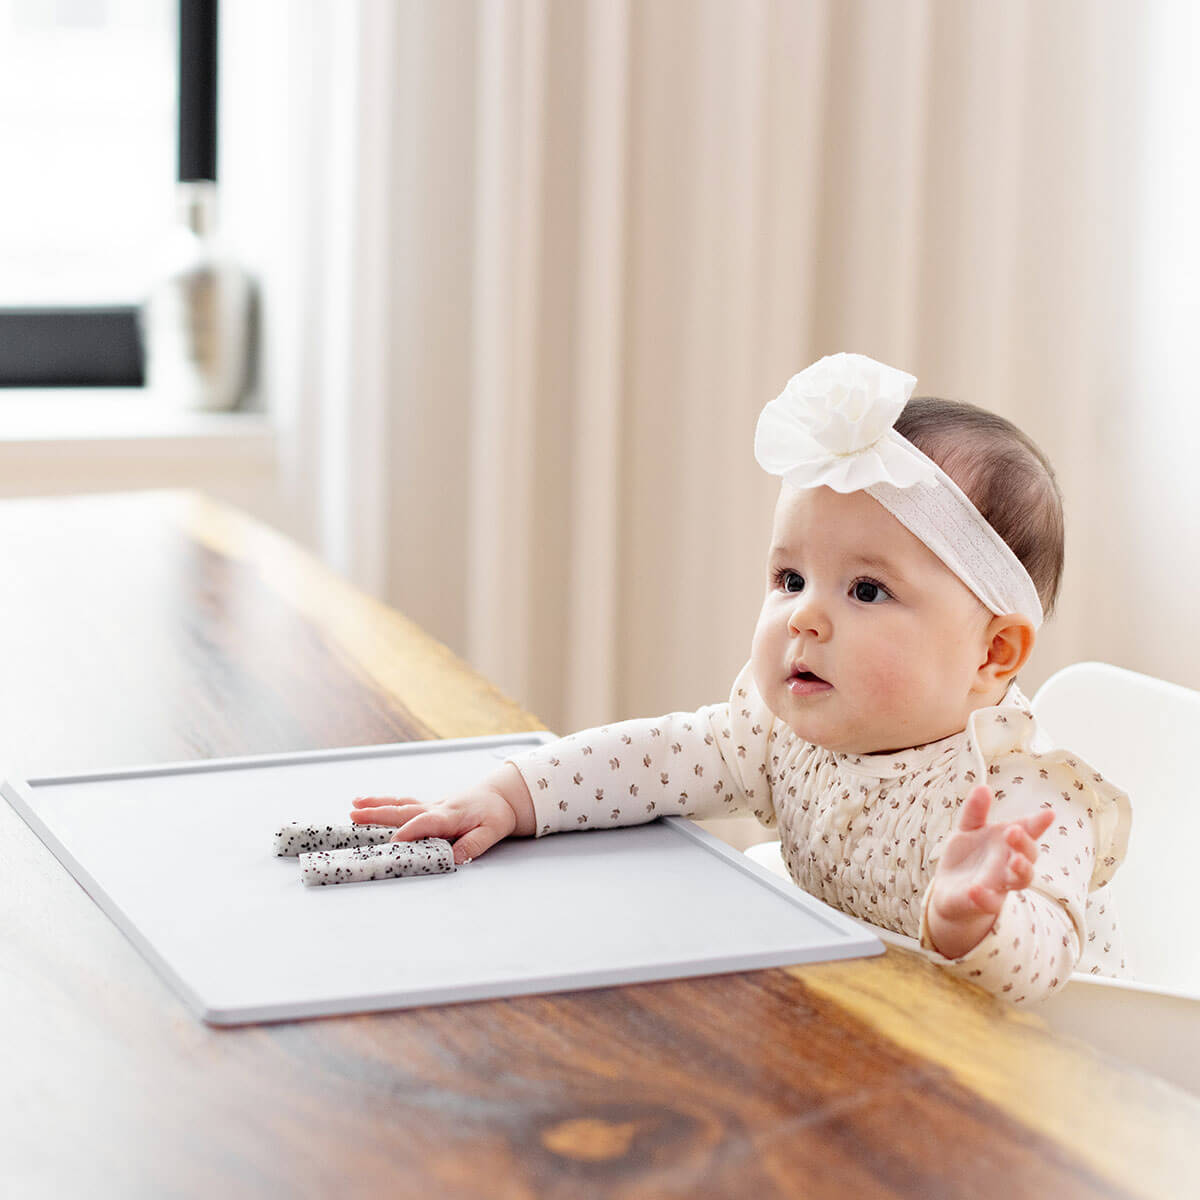 ezpz Mini Placemat in Pewter Gray is a silicone placemat for toddlers that grips to the table